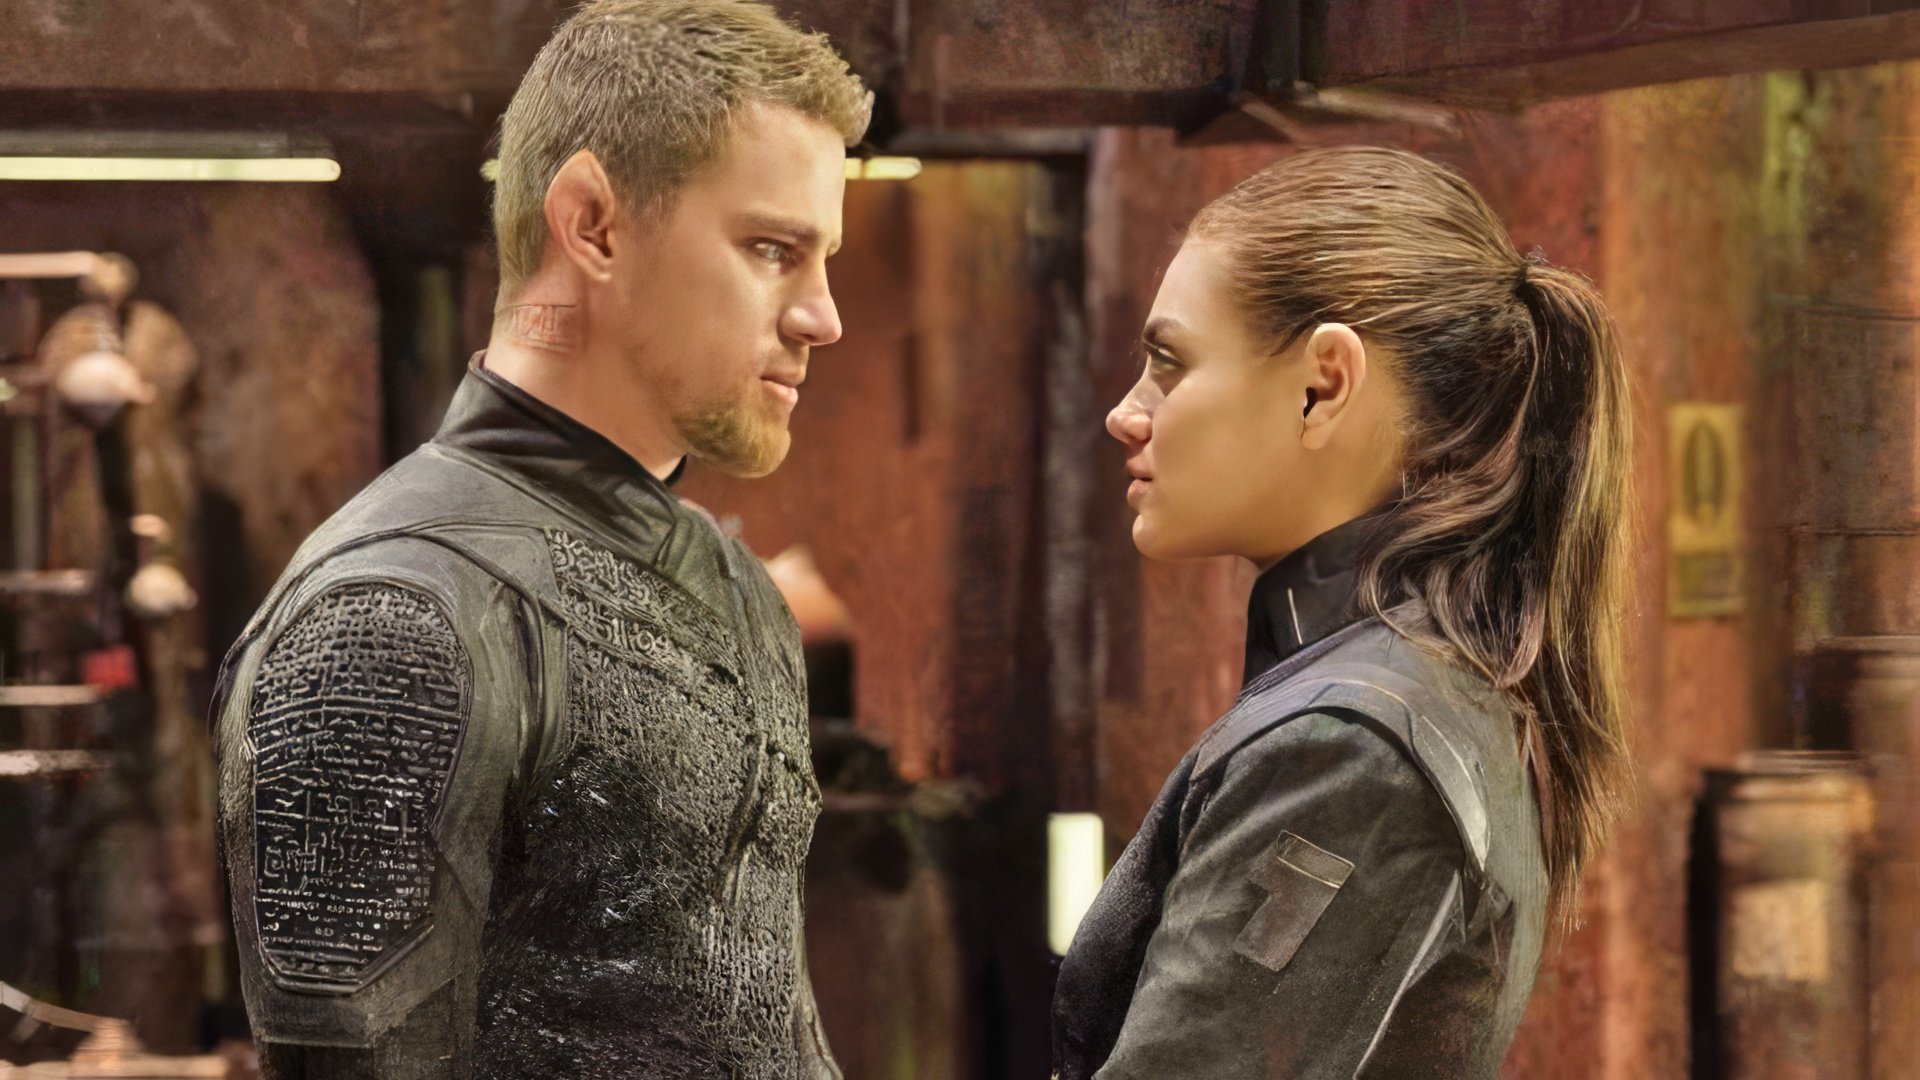 'Jupiter Ascending' was met with a cool reception